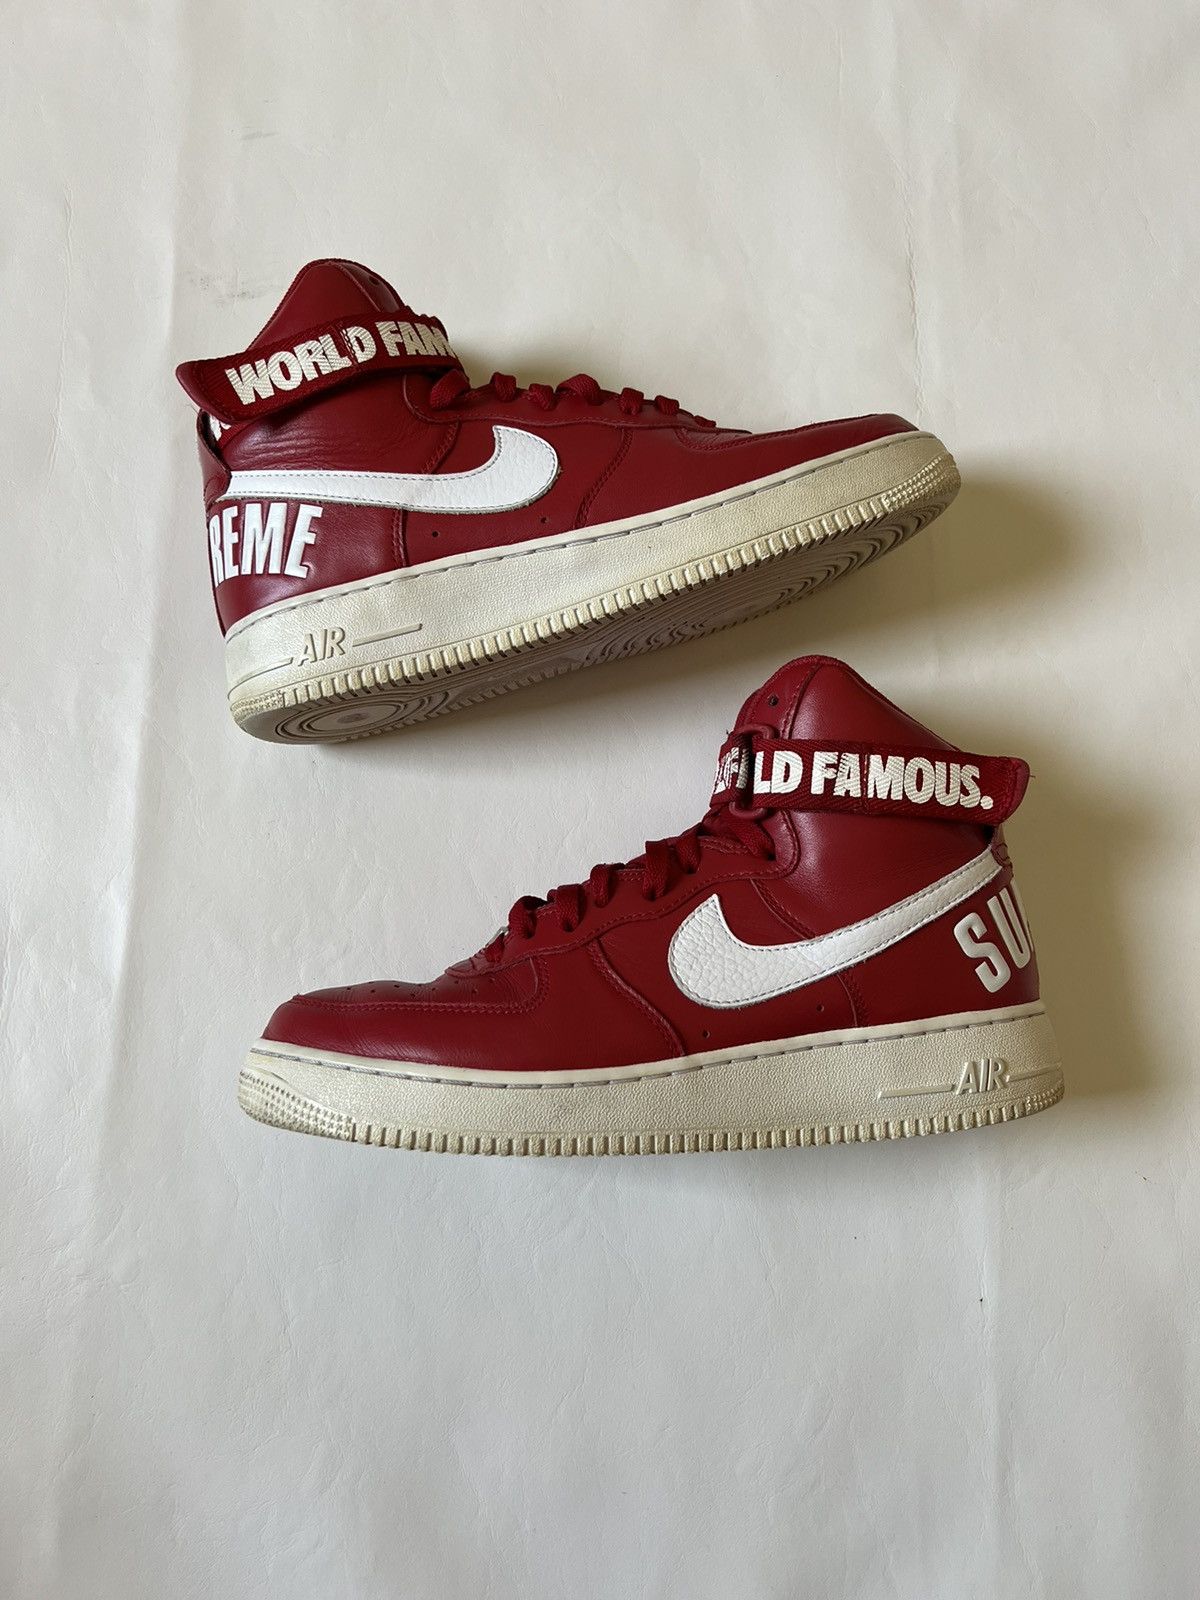 Nike Supreme X Air Force 1 High Sp Red | Grailed